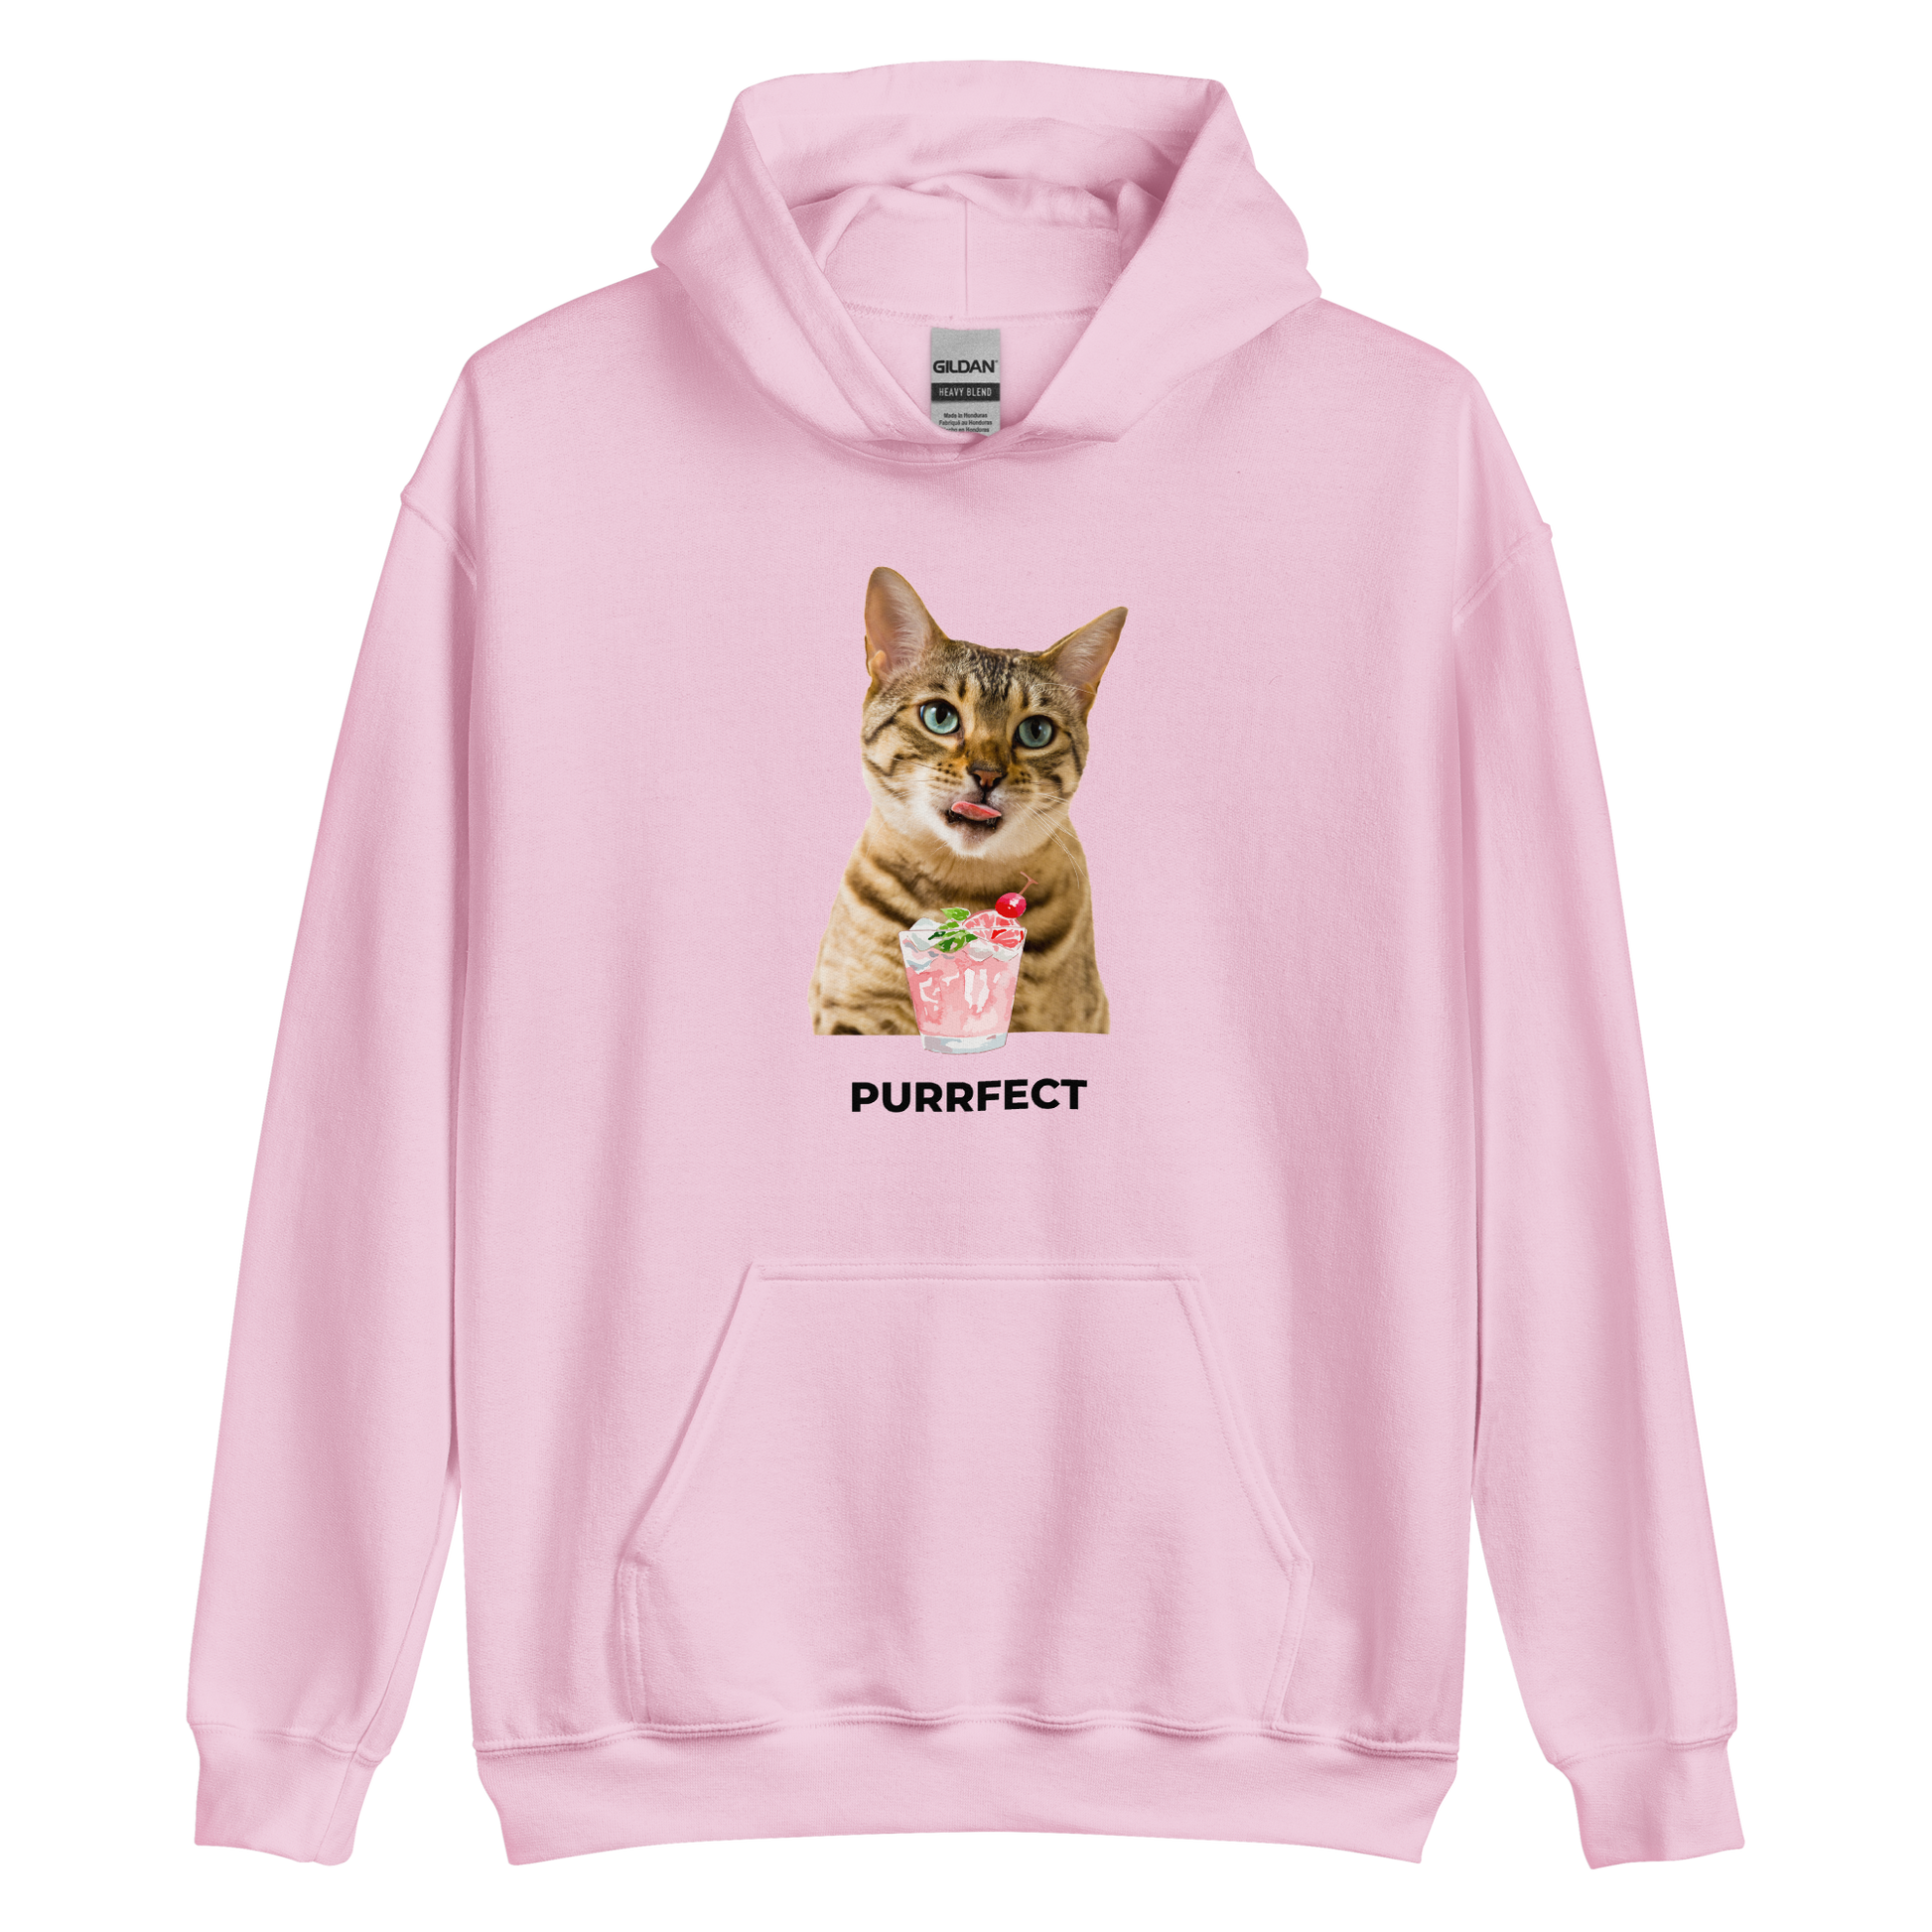 Light Pink Cat Hoodie featuring an adorable Purrfect graphic on the chest - Funny Graphic Cat Hoodies - Boozy Fox